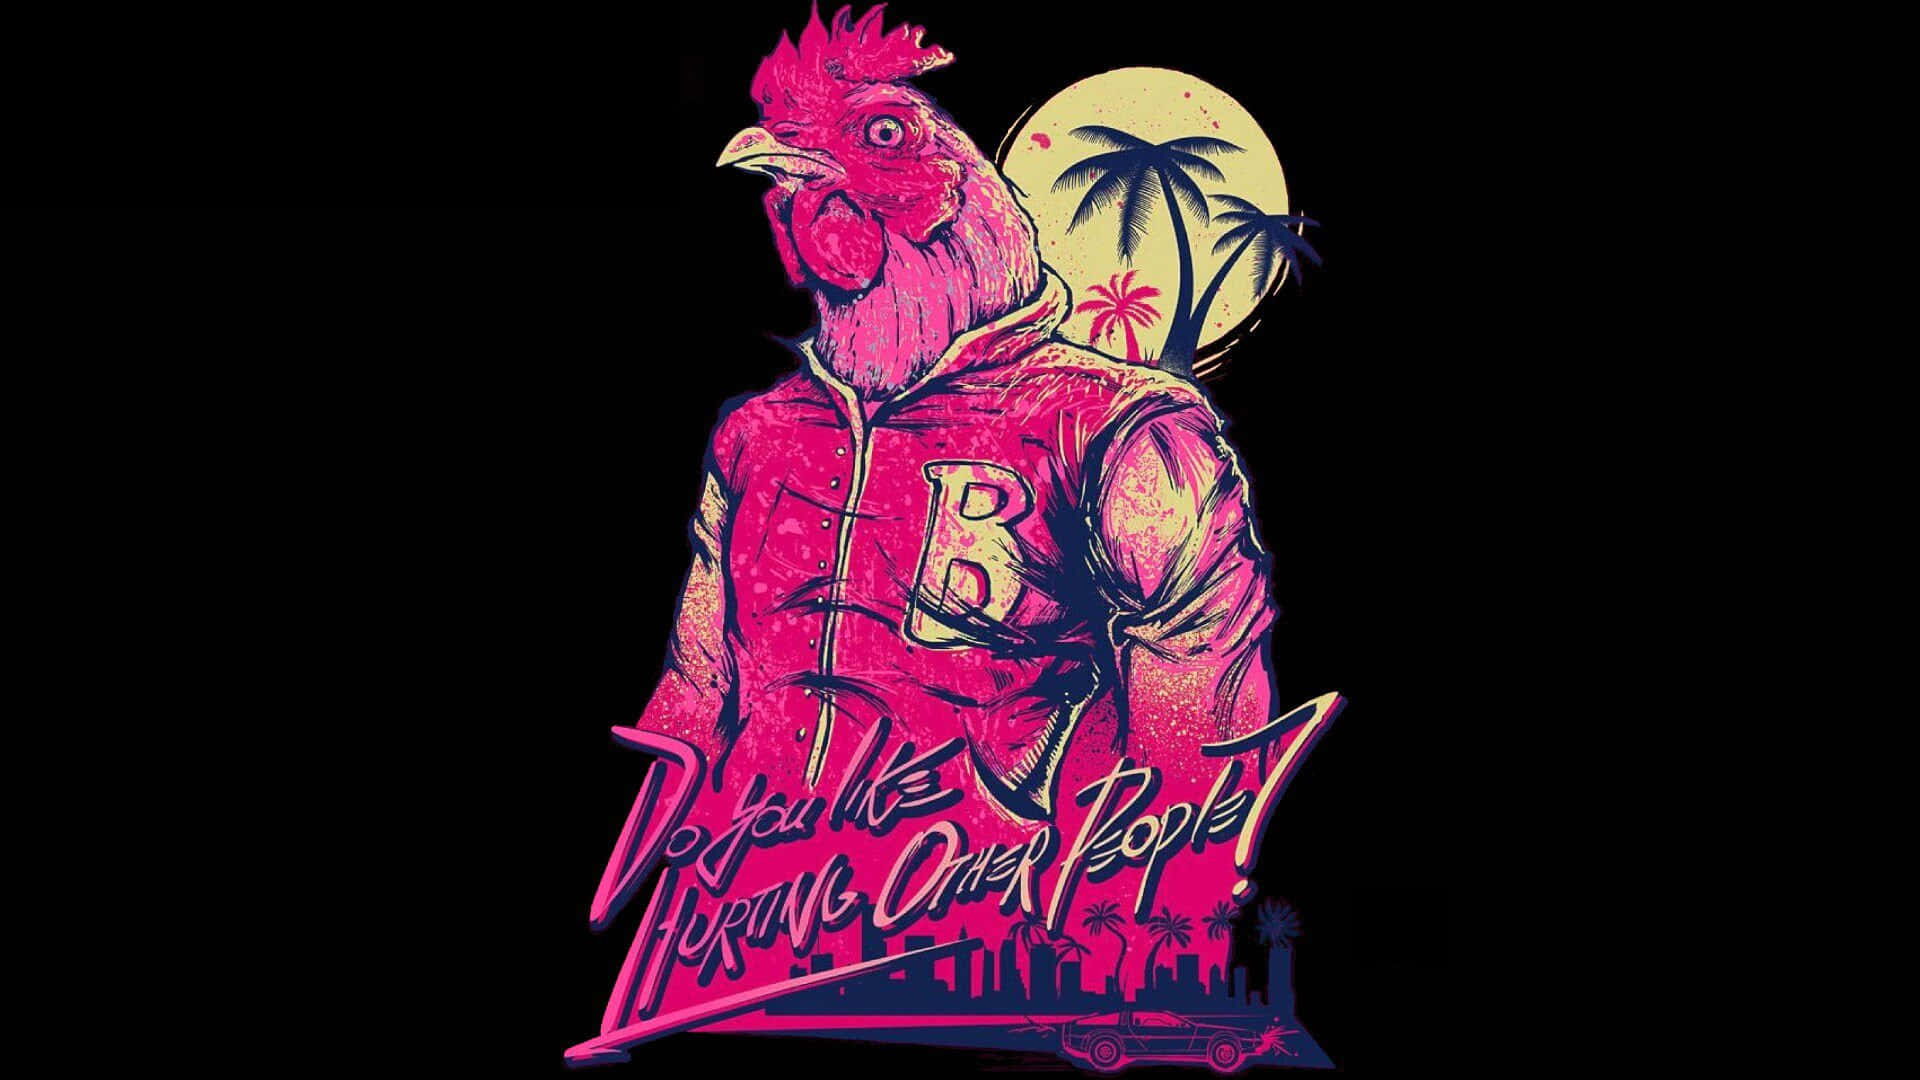 Action-packed Hotline Miami videogame backdrop